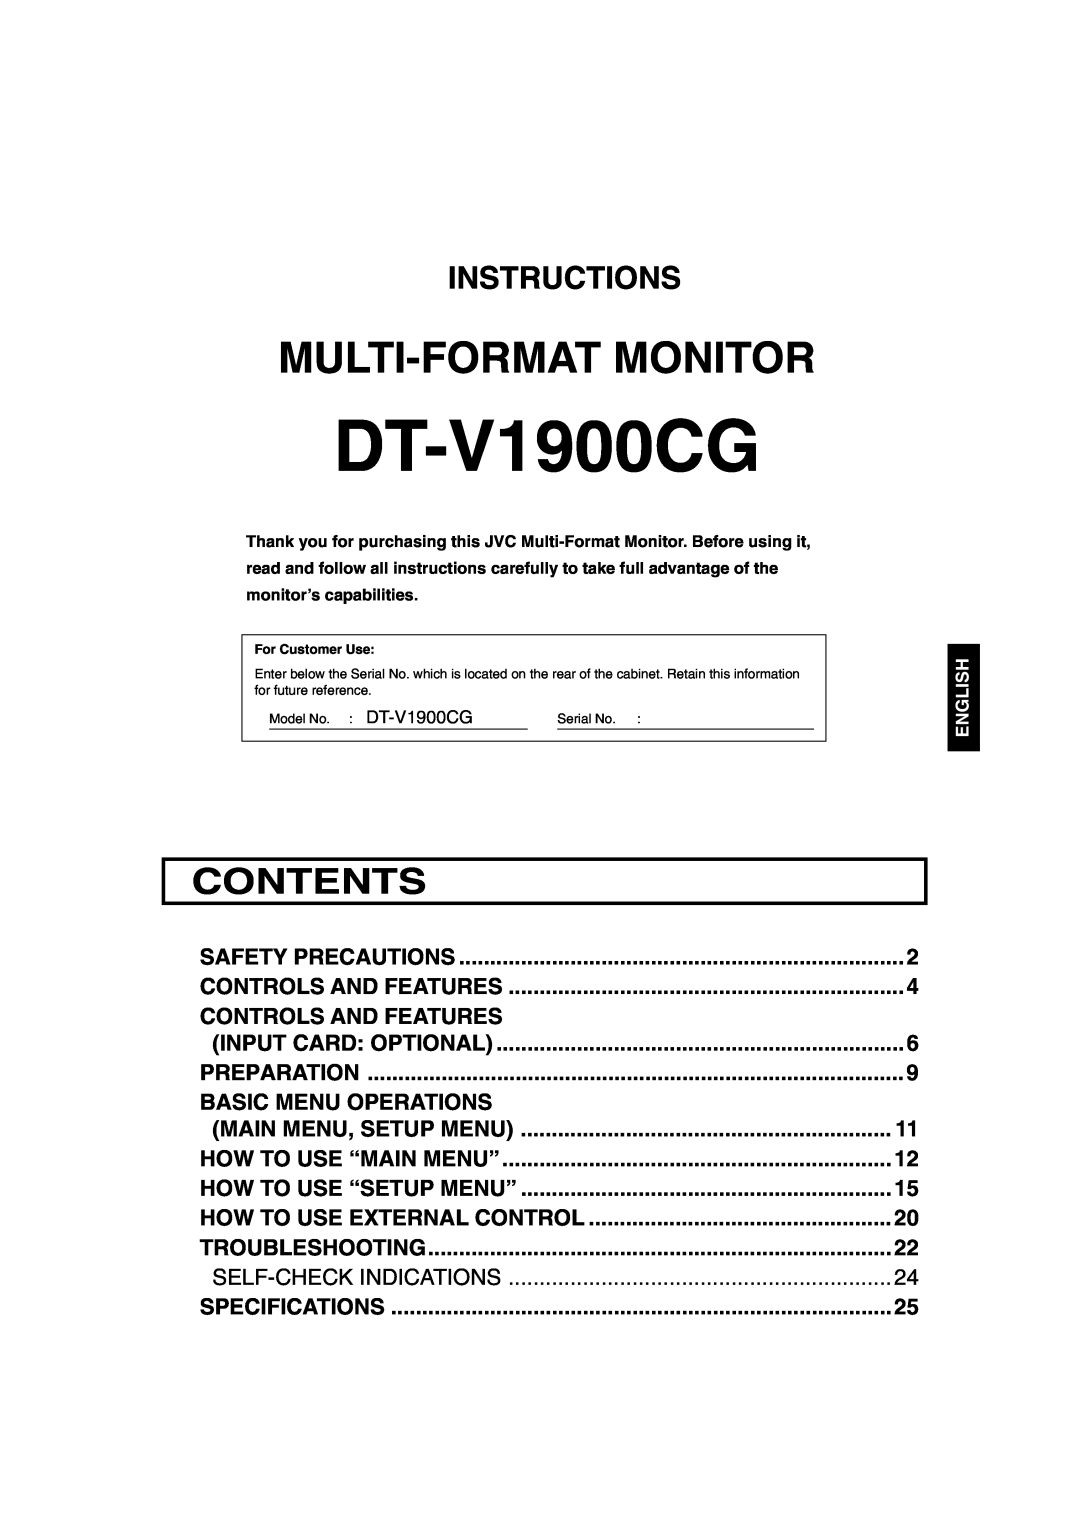 JVC DT-V1900CG manual Contents, Instructions, Controls And Features, Basic Menu Operations, Multi-Format Monitor 